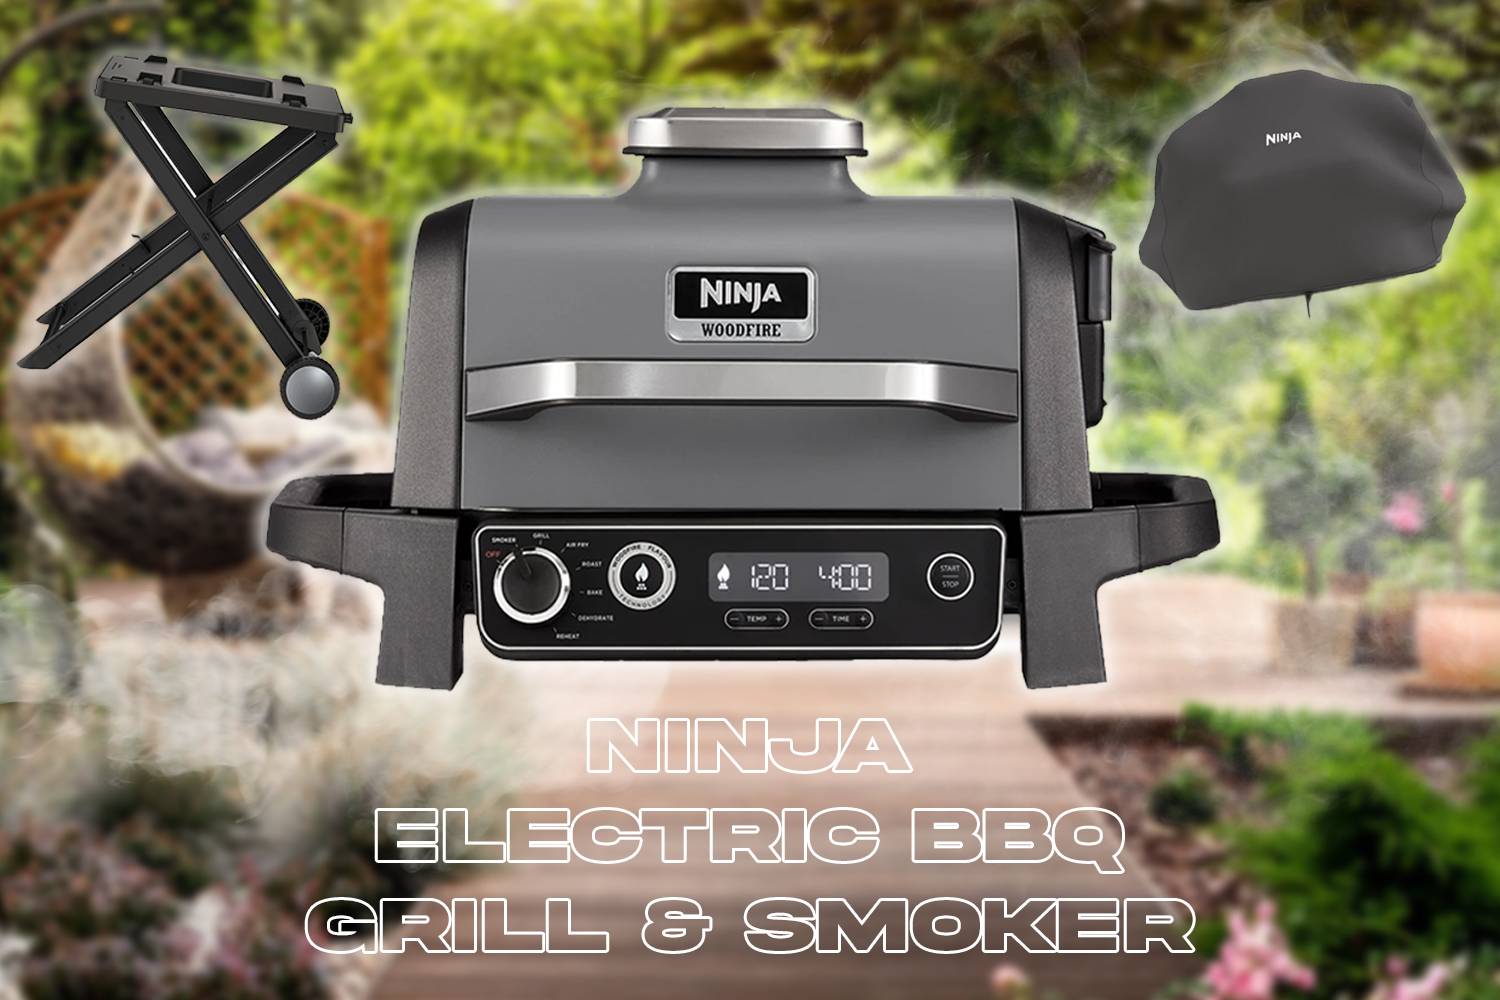 Win this Ninja Woodfire Pro XL Electric BBQ Grill & Smoker - Only 999 Entries